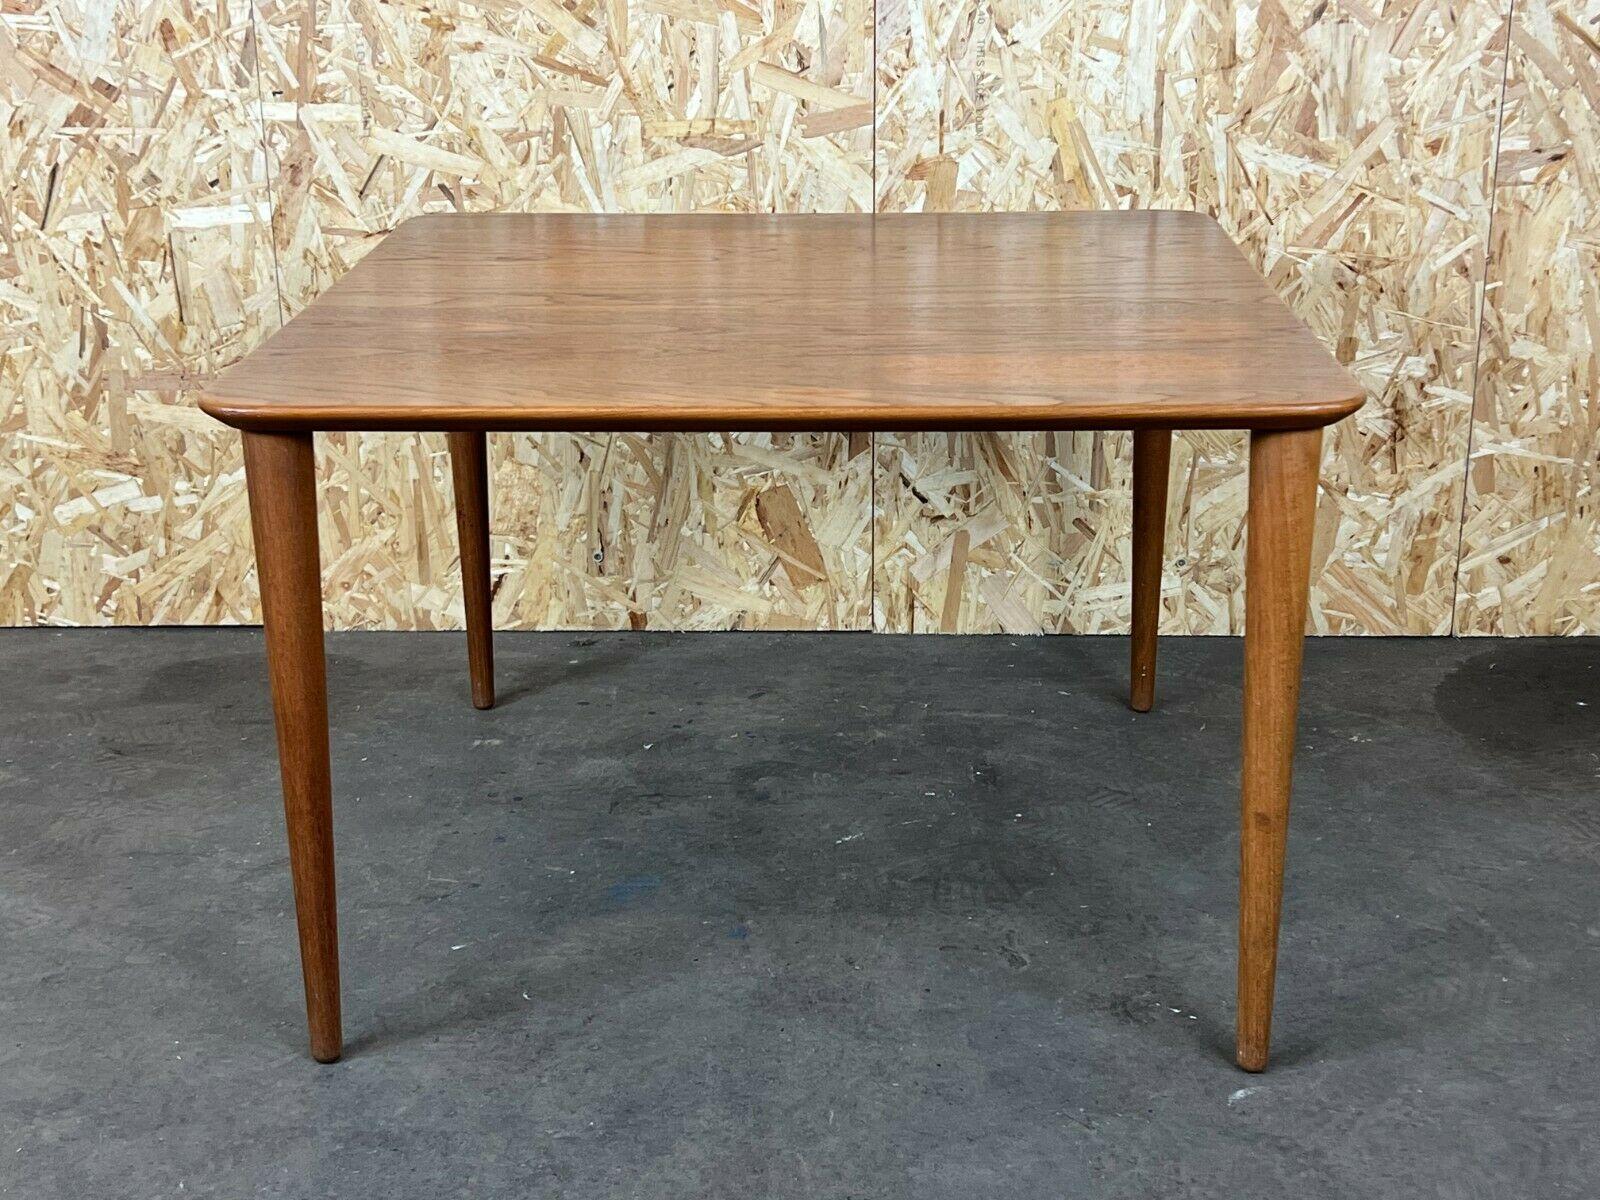 70's style coffee table